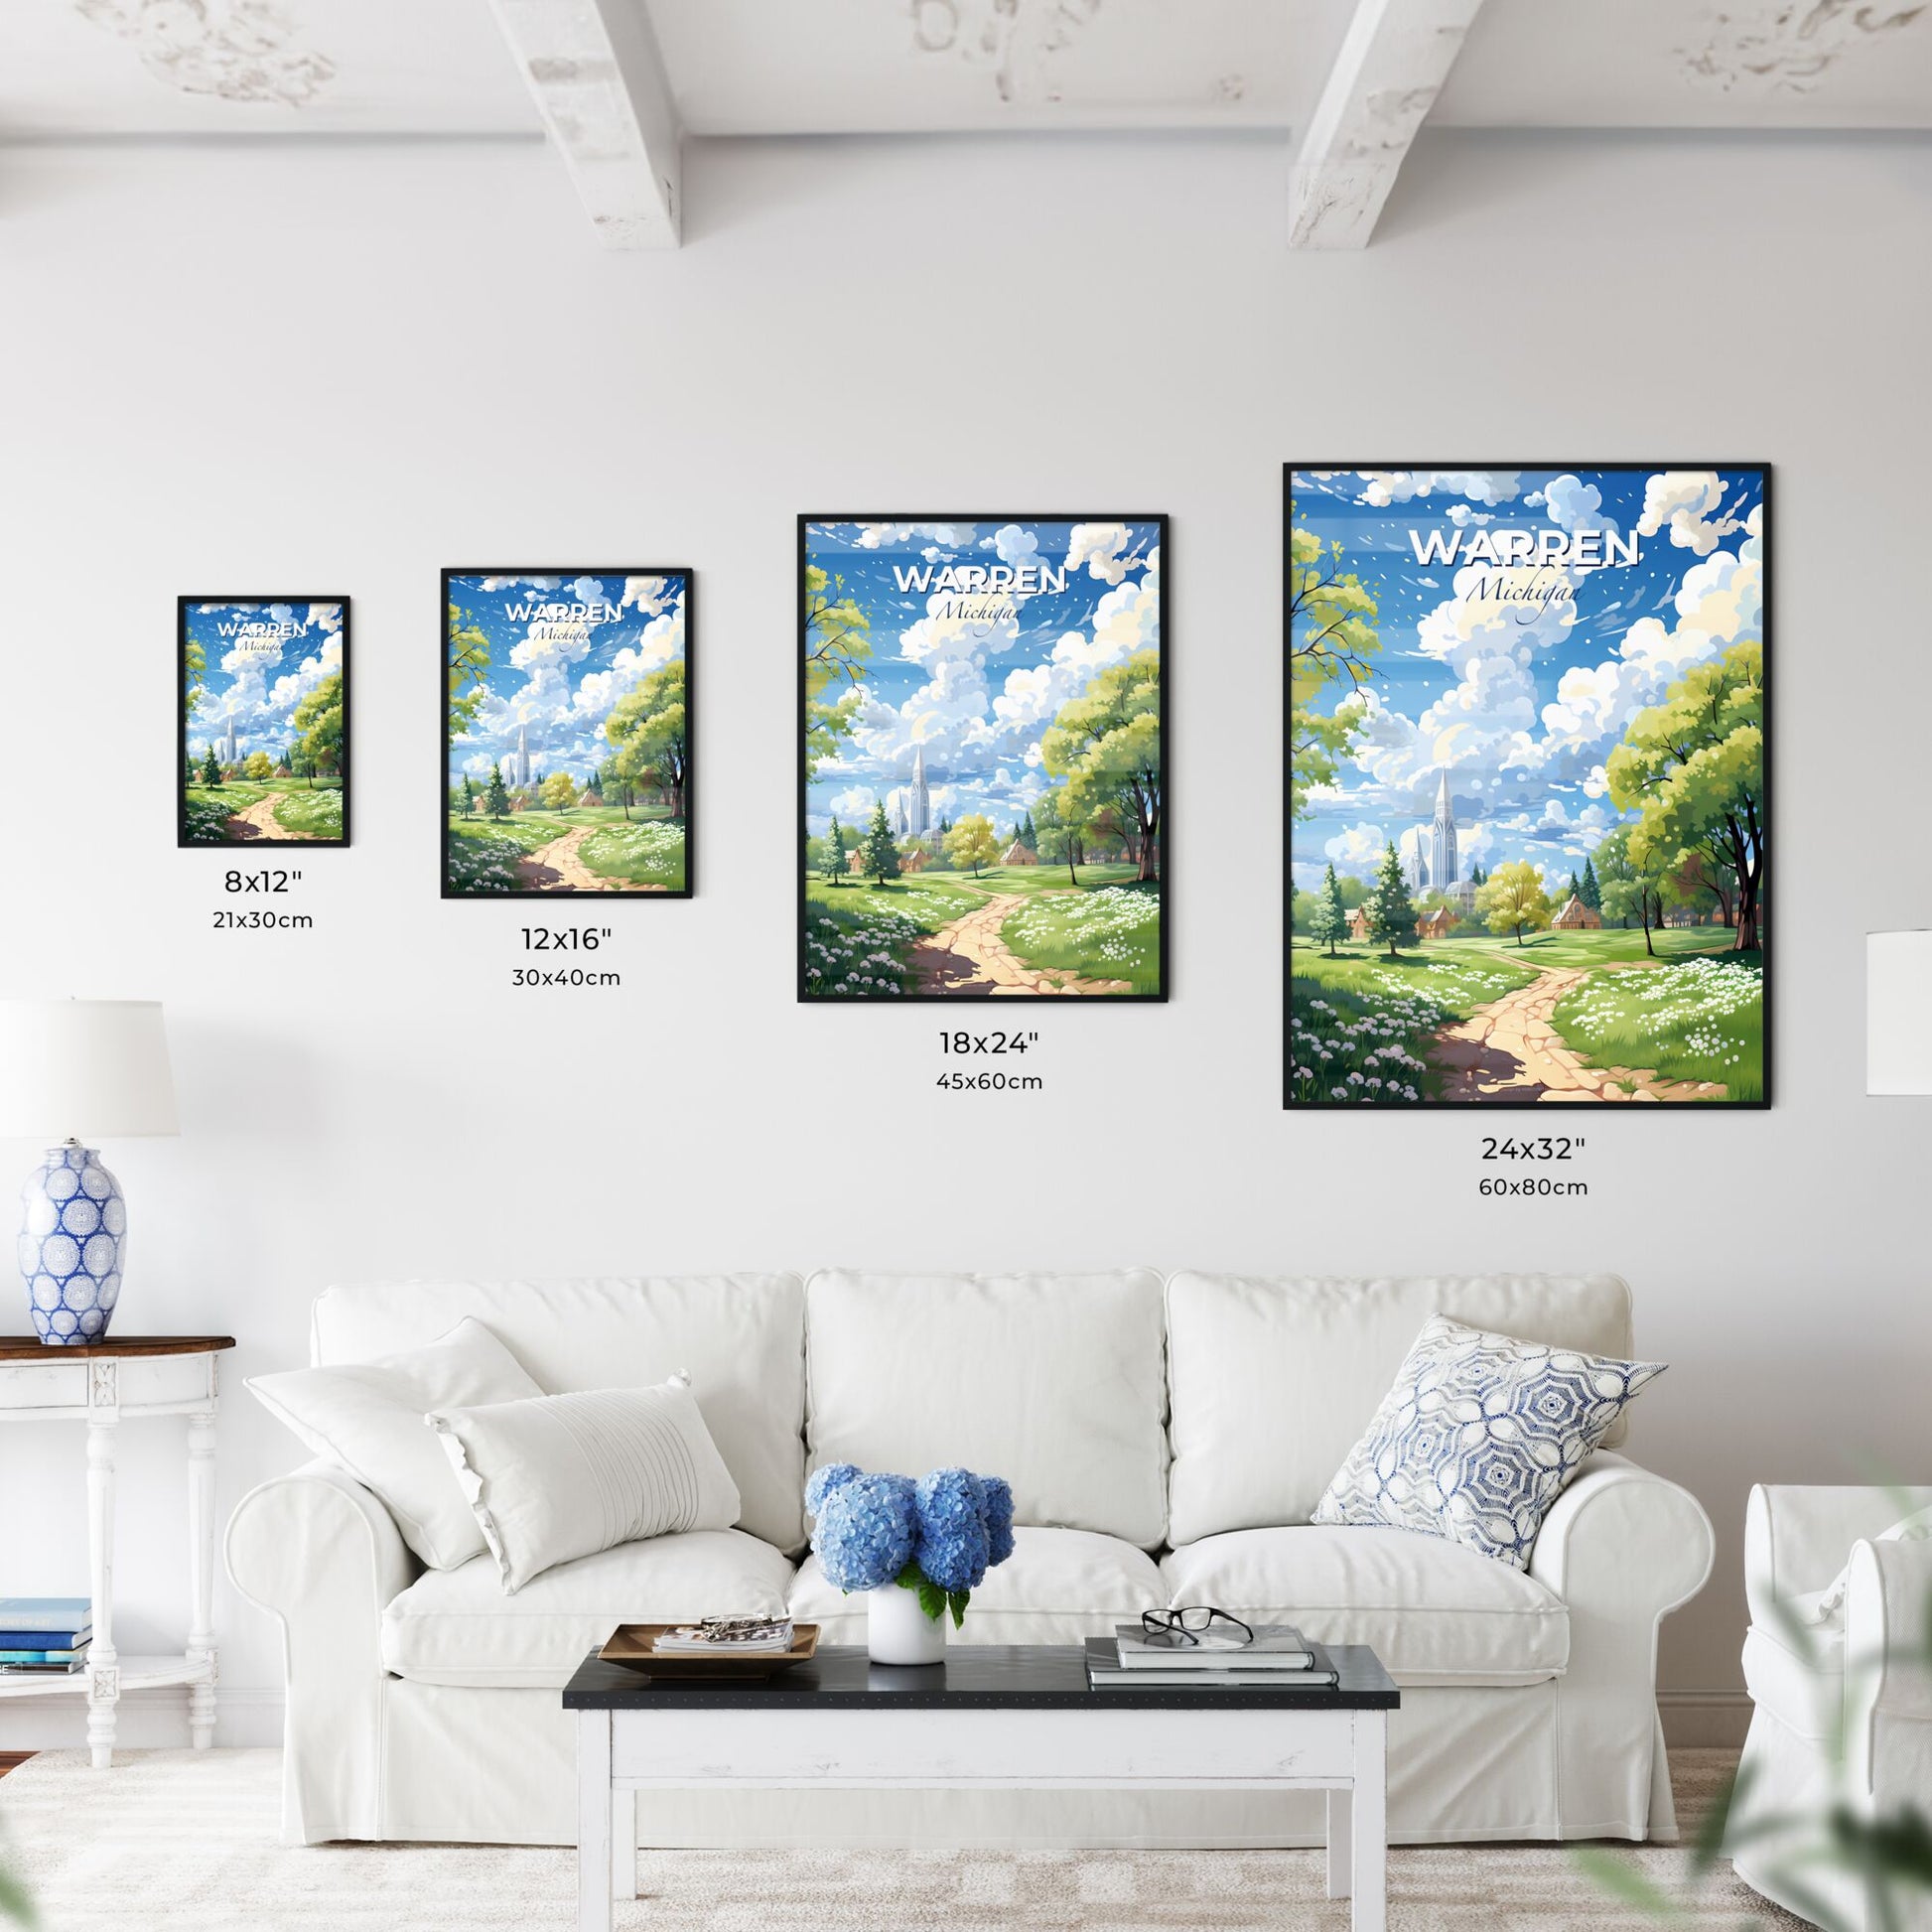 Warren, Michigan, A Poster of a landscape with a path and trees and buildings Default Title